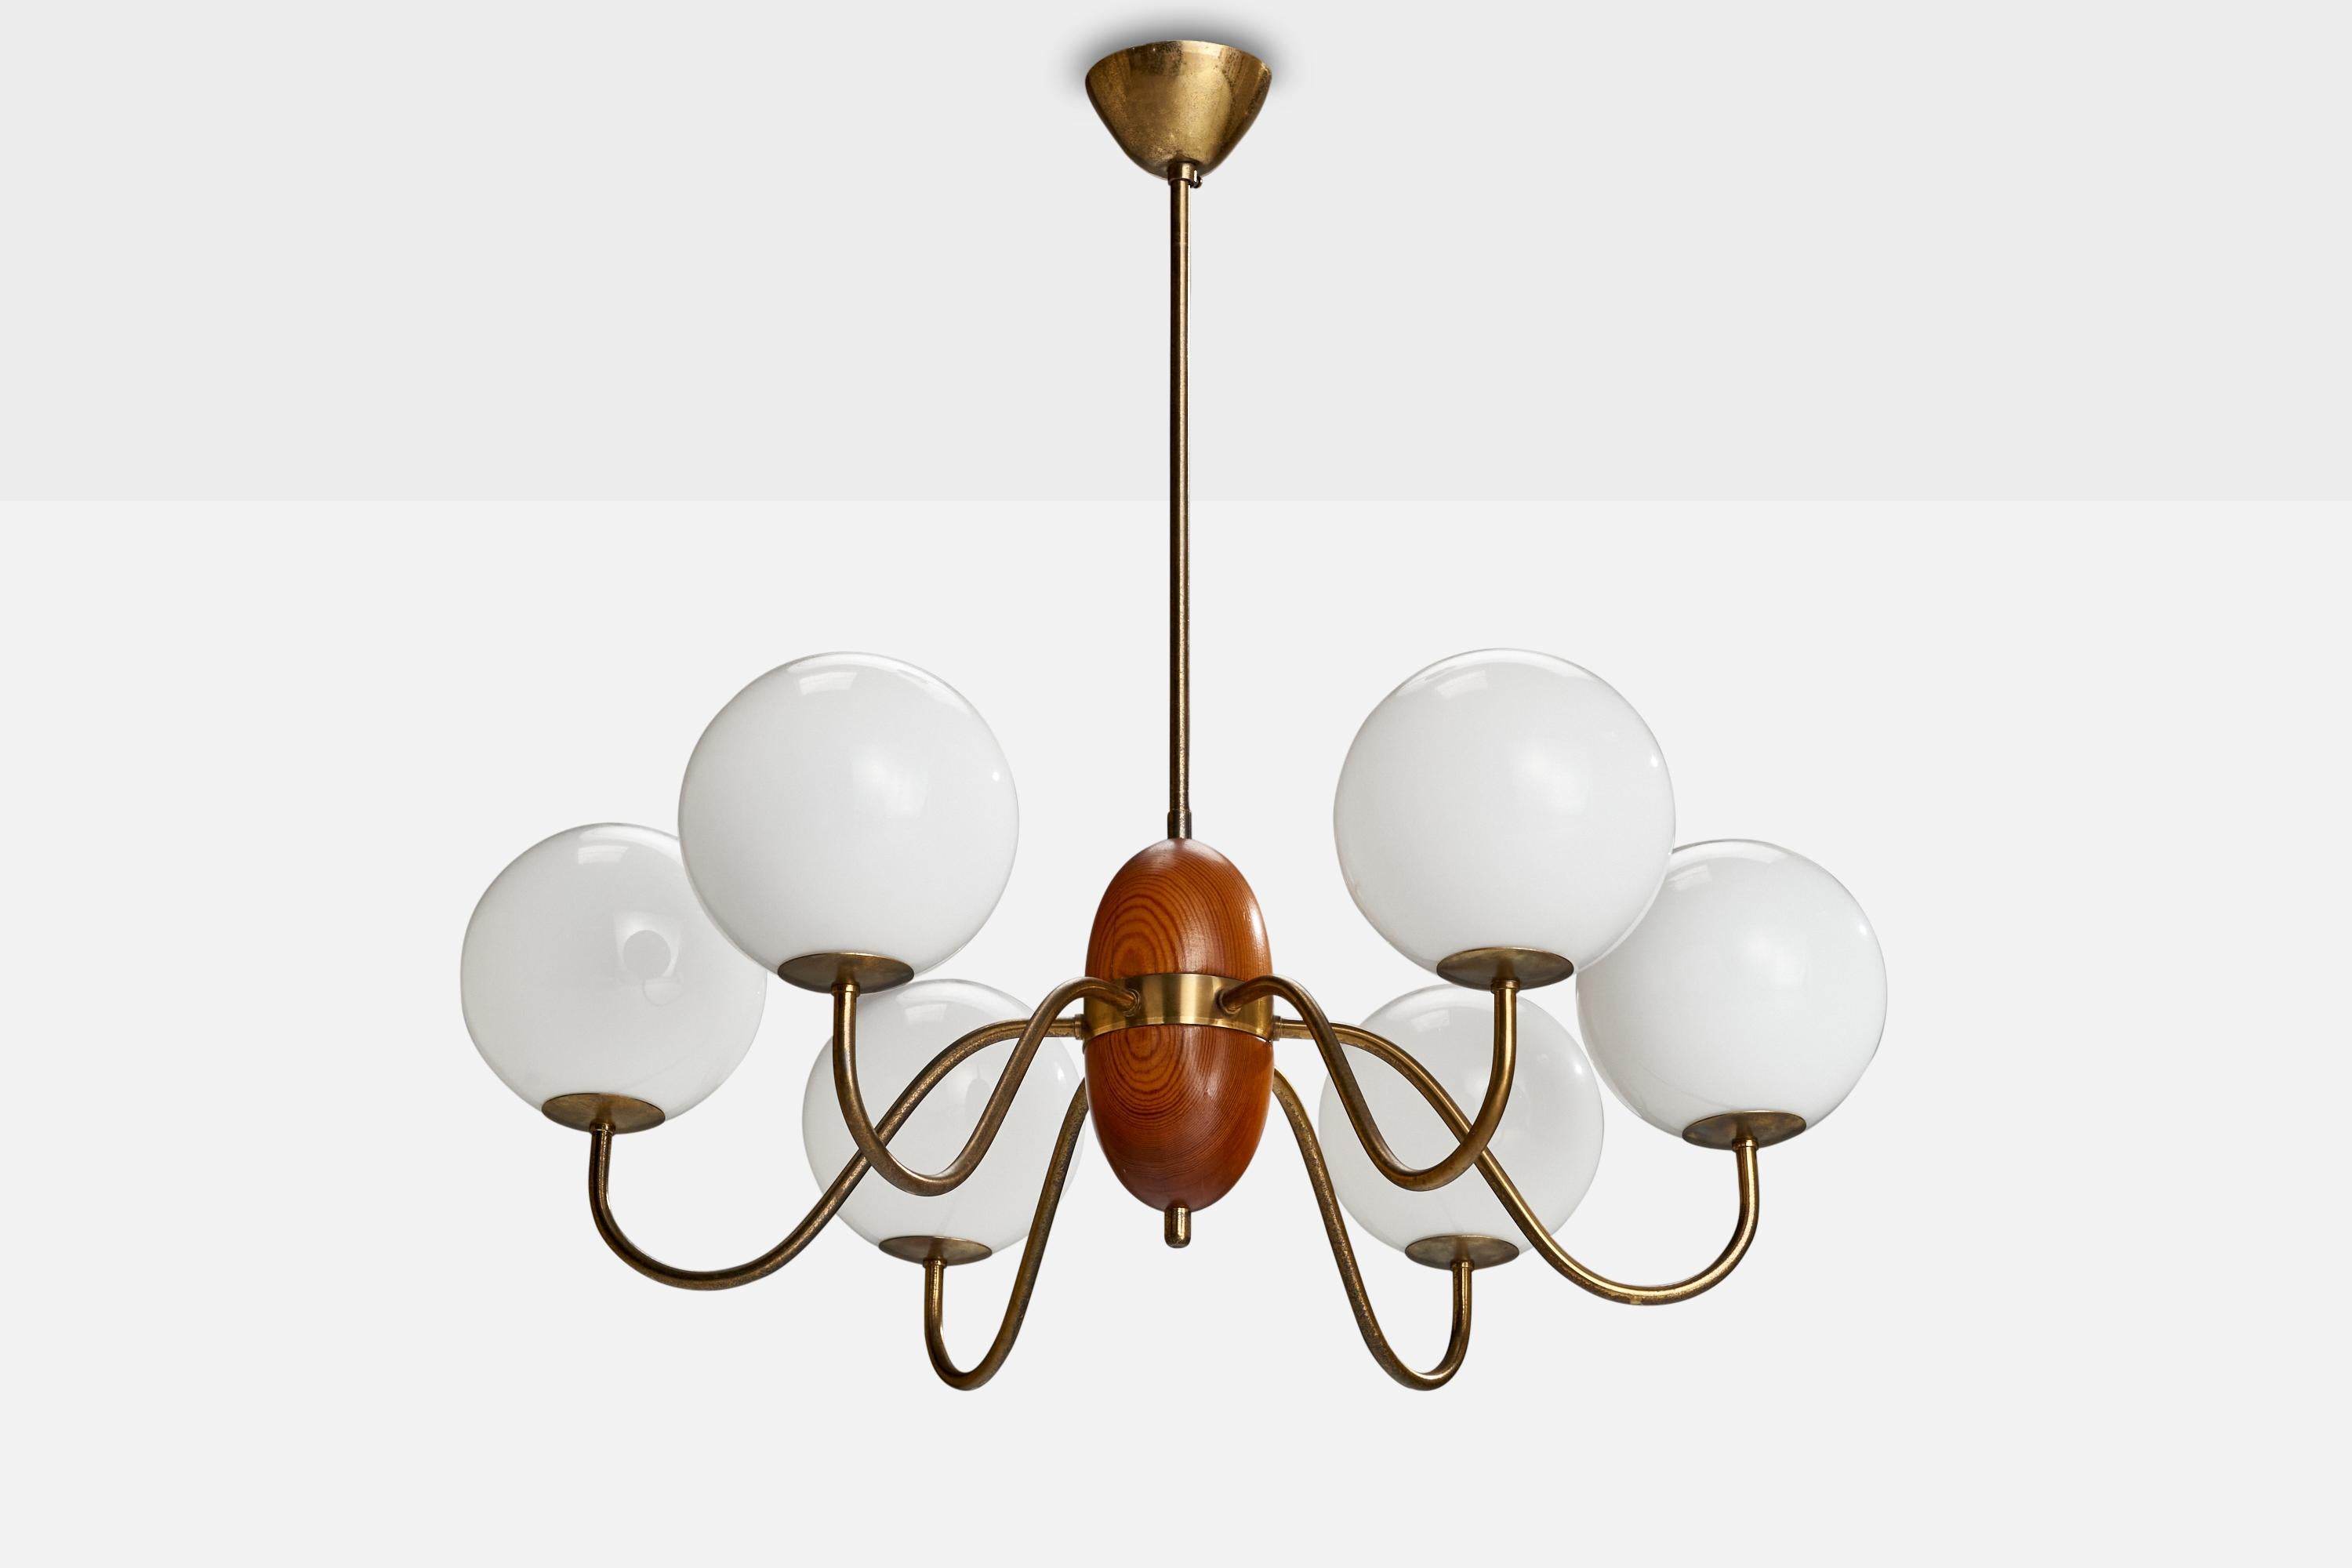 A brass, opaline glass and stained pine chandelier designed and produced in Sweden, c. 1950s.

Dimensions of canopy (inches): 2.03” H x 3.73” Diameter
Socket takes standard E-14 bulbs. 6 socket.There is no maximum wattage stated on the fixture. All